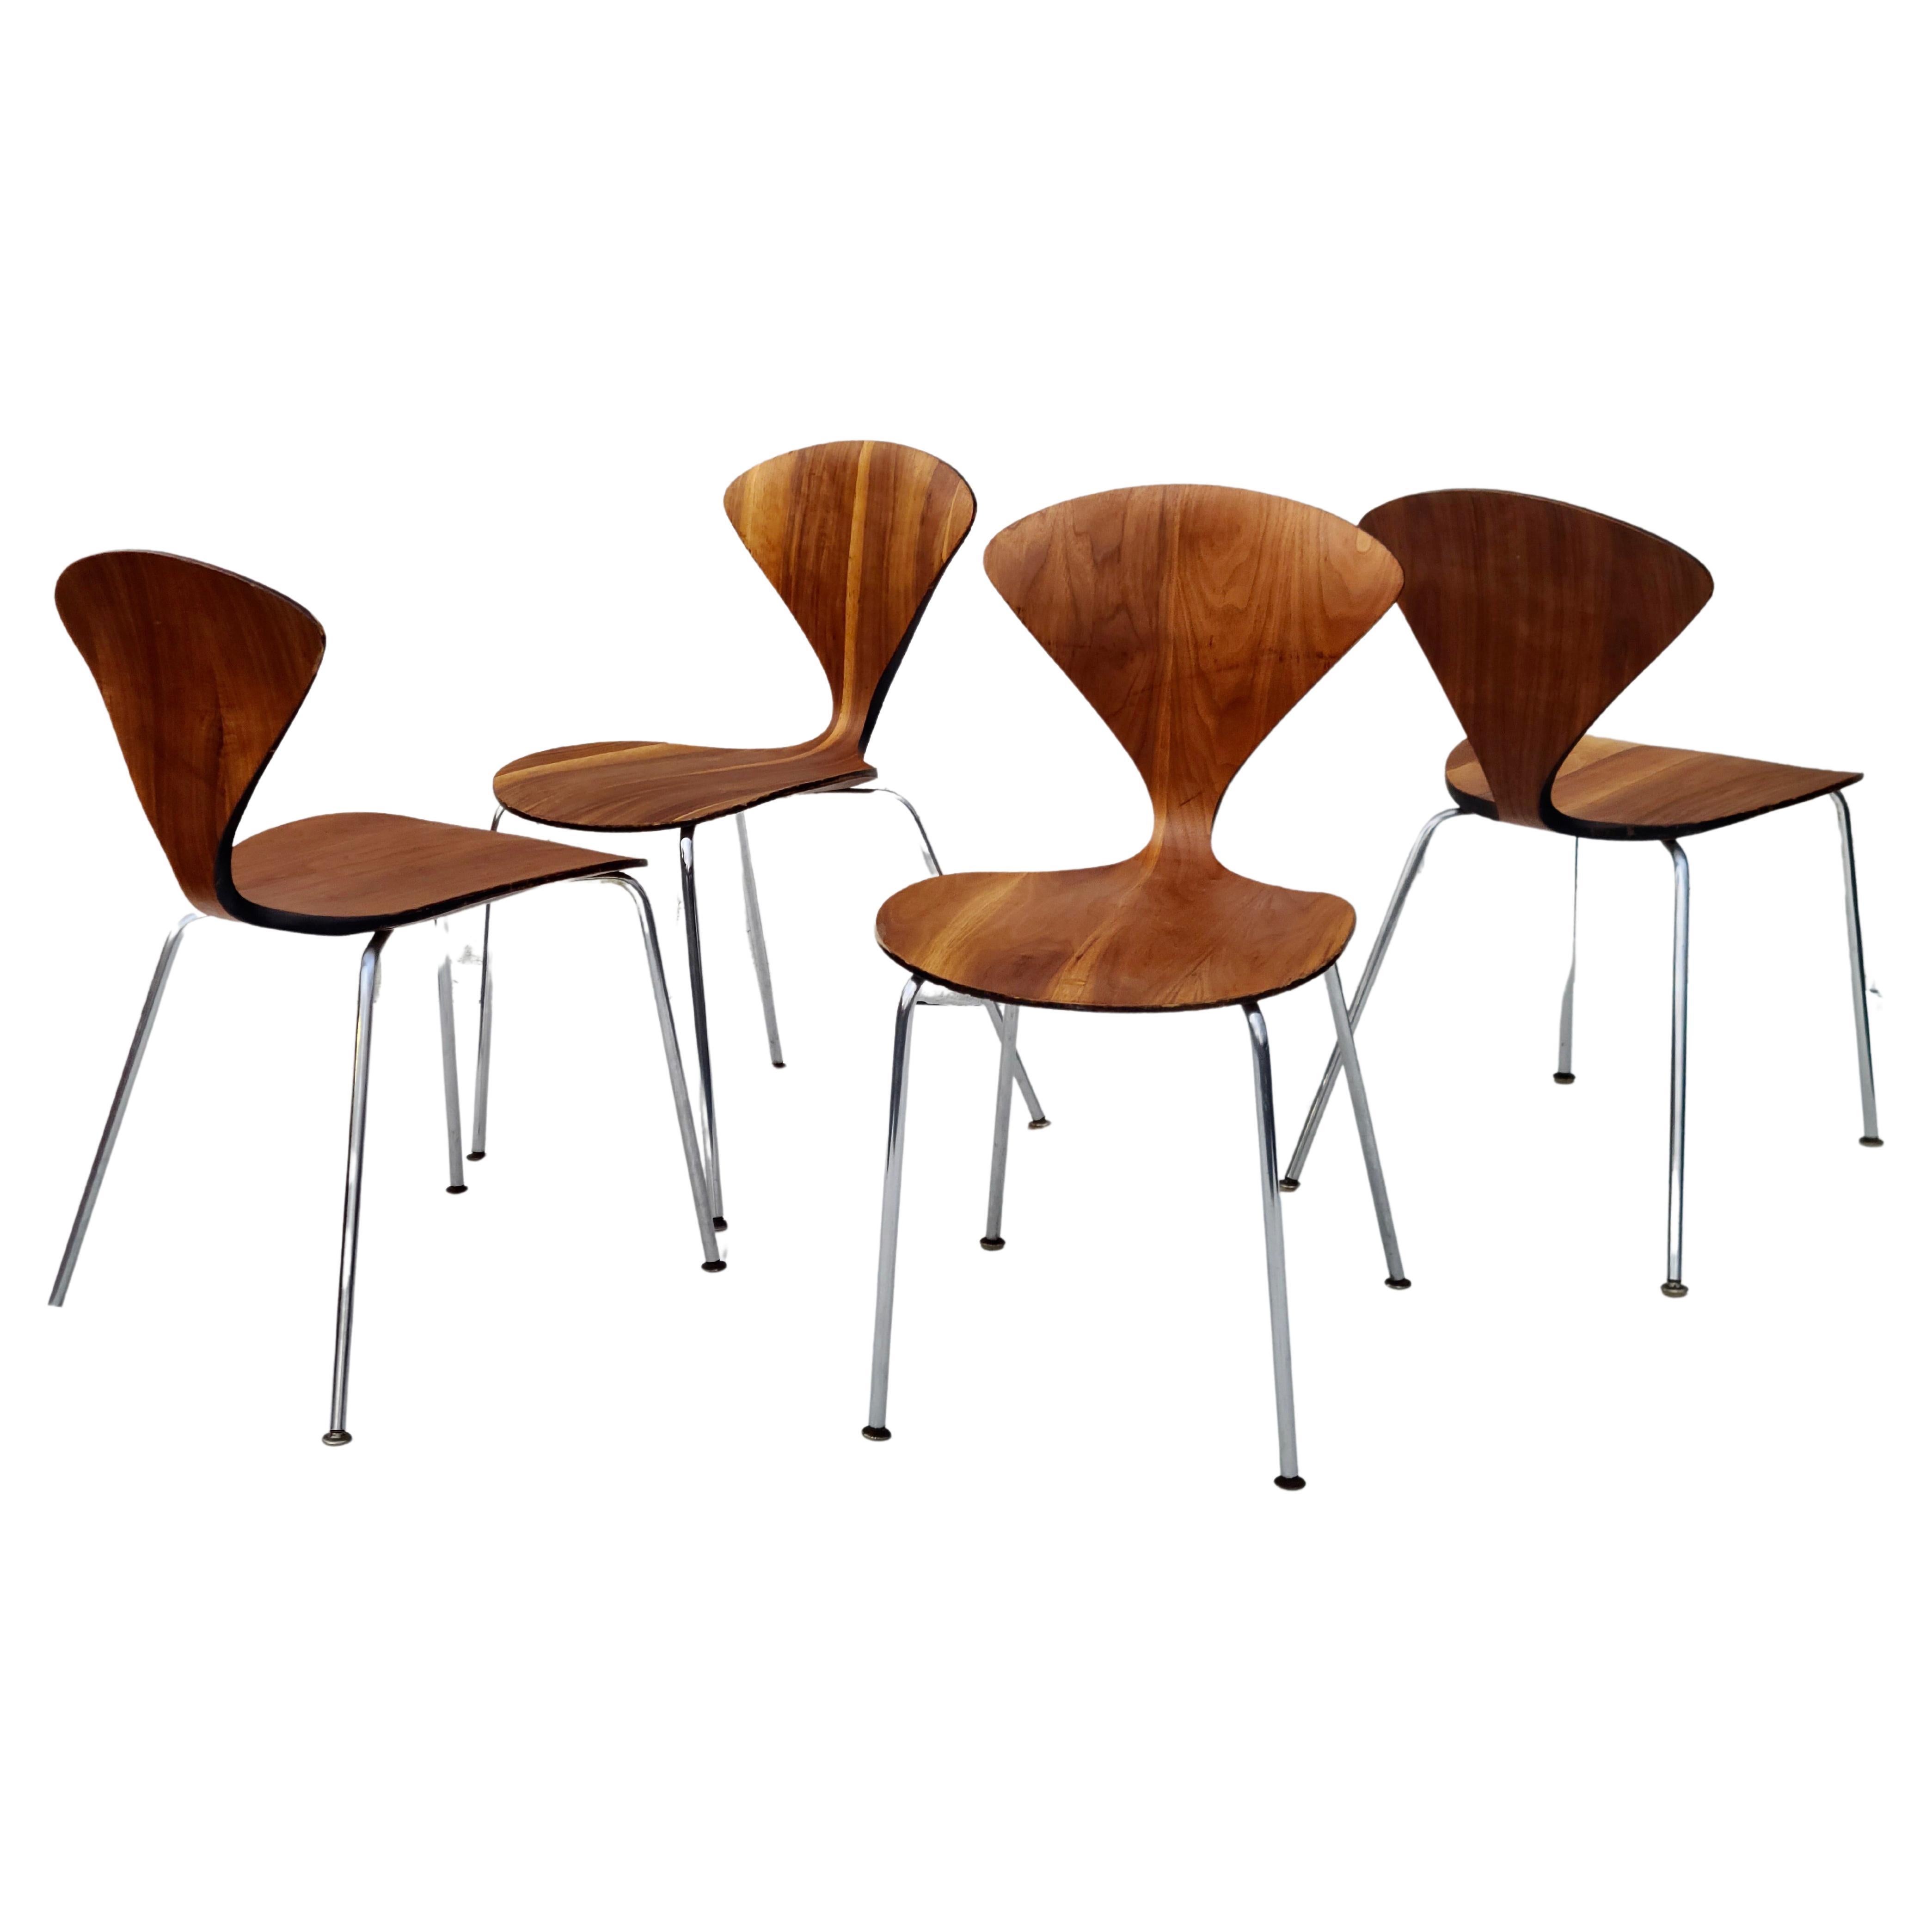 Mid-20th Century Set of 4 Norman Cherner Directional Side Chairs Plycraft For Sale